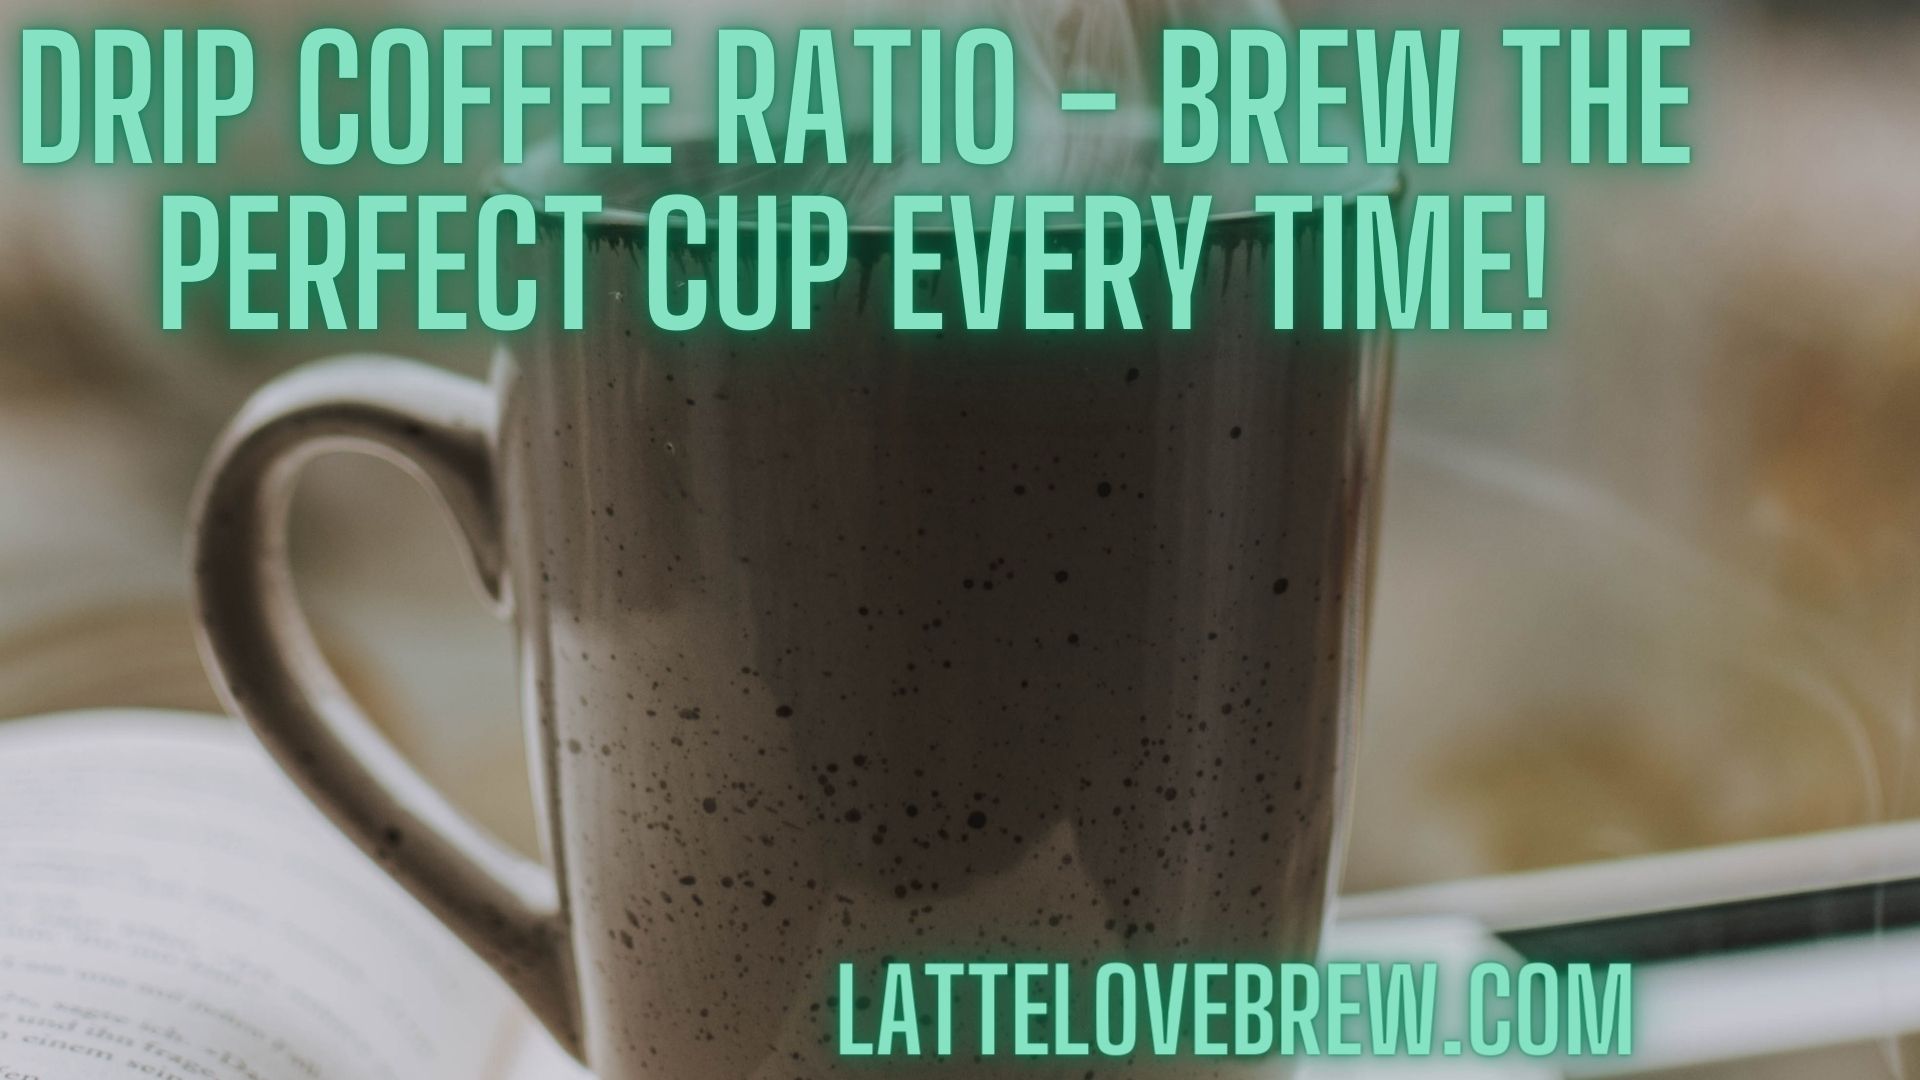 Drip Coffee Ratio - Brew the Perfect Cup Every Time!